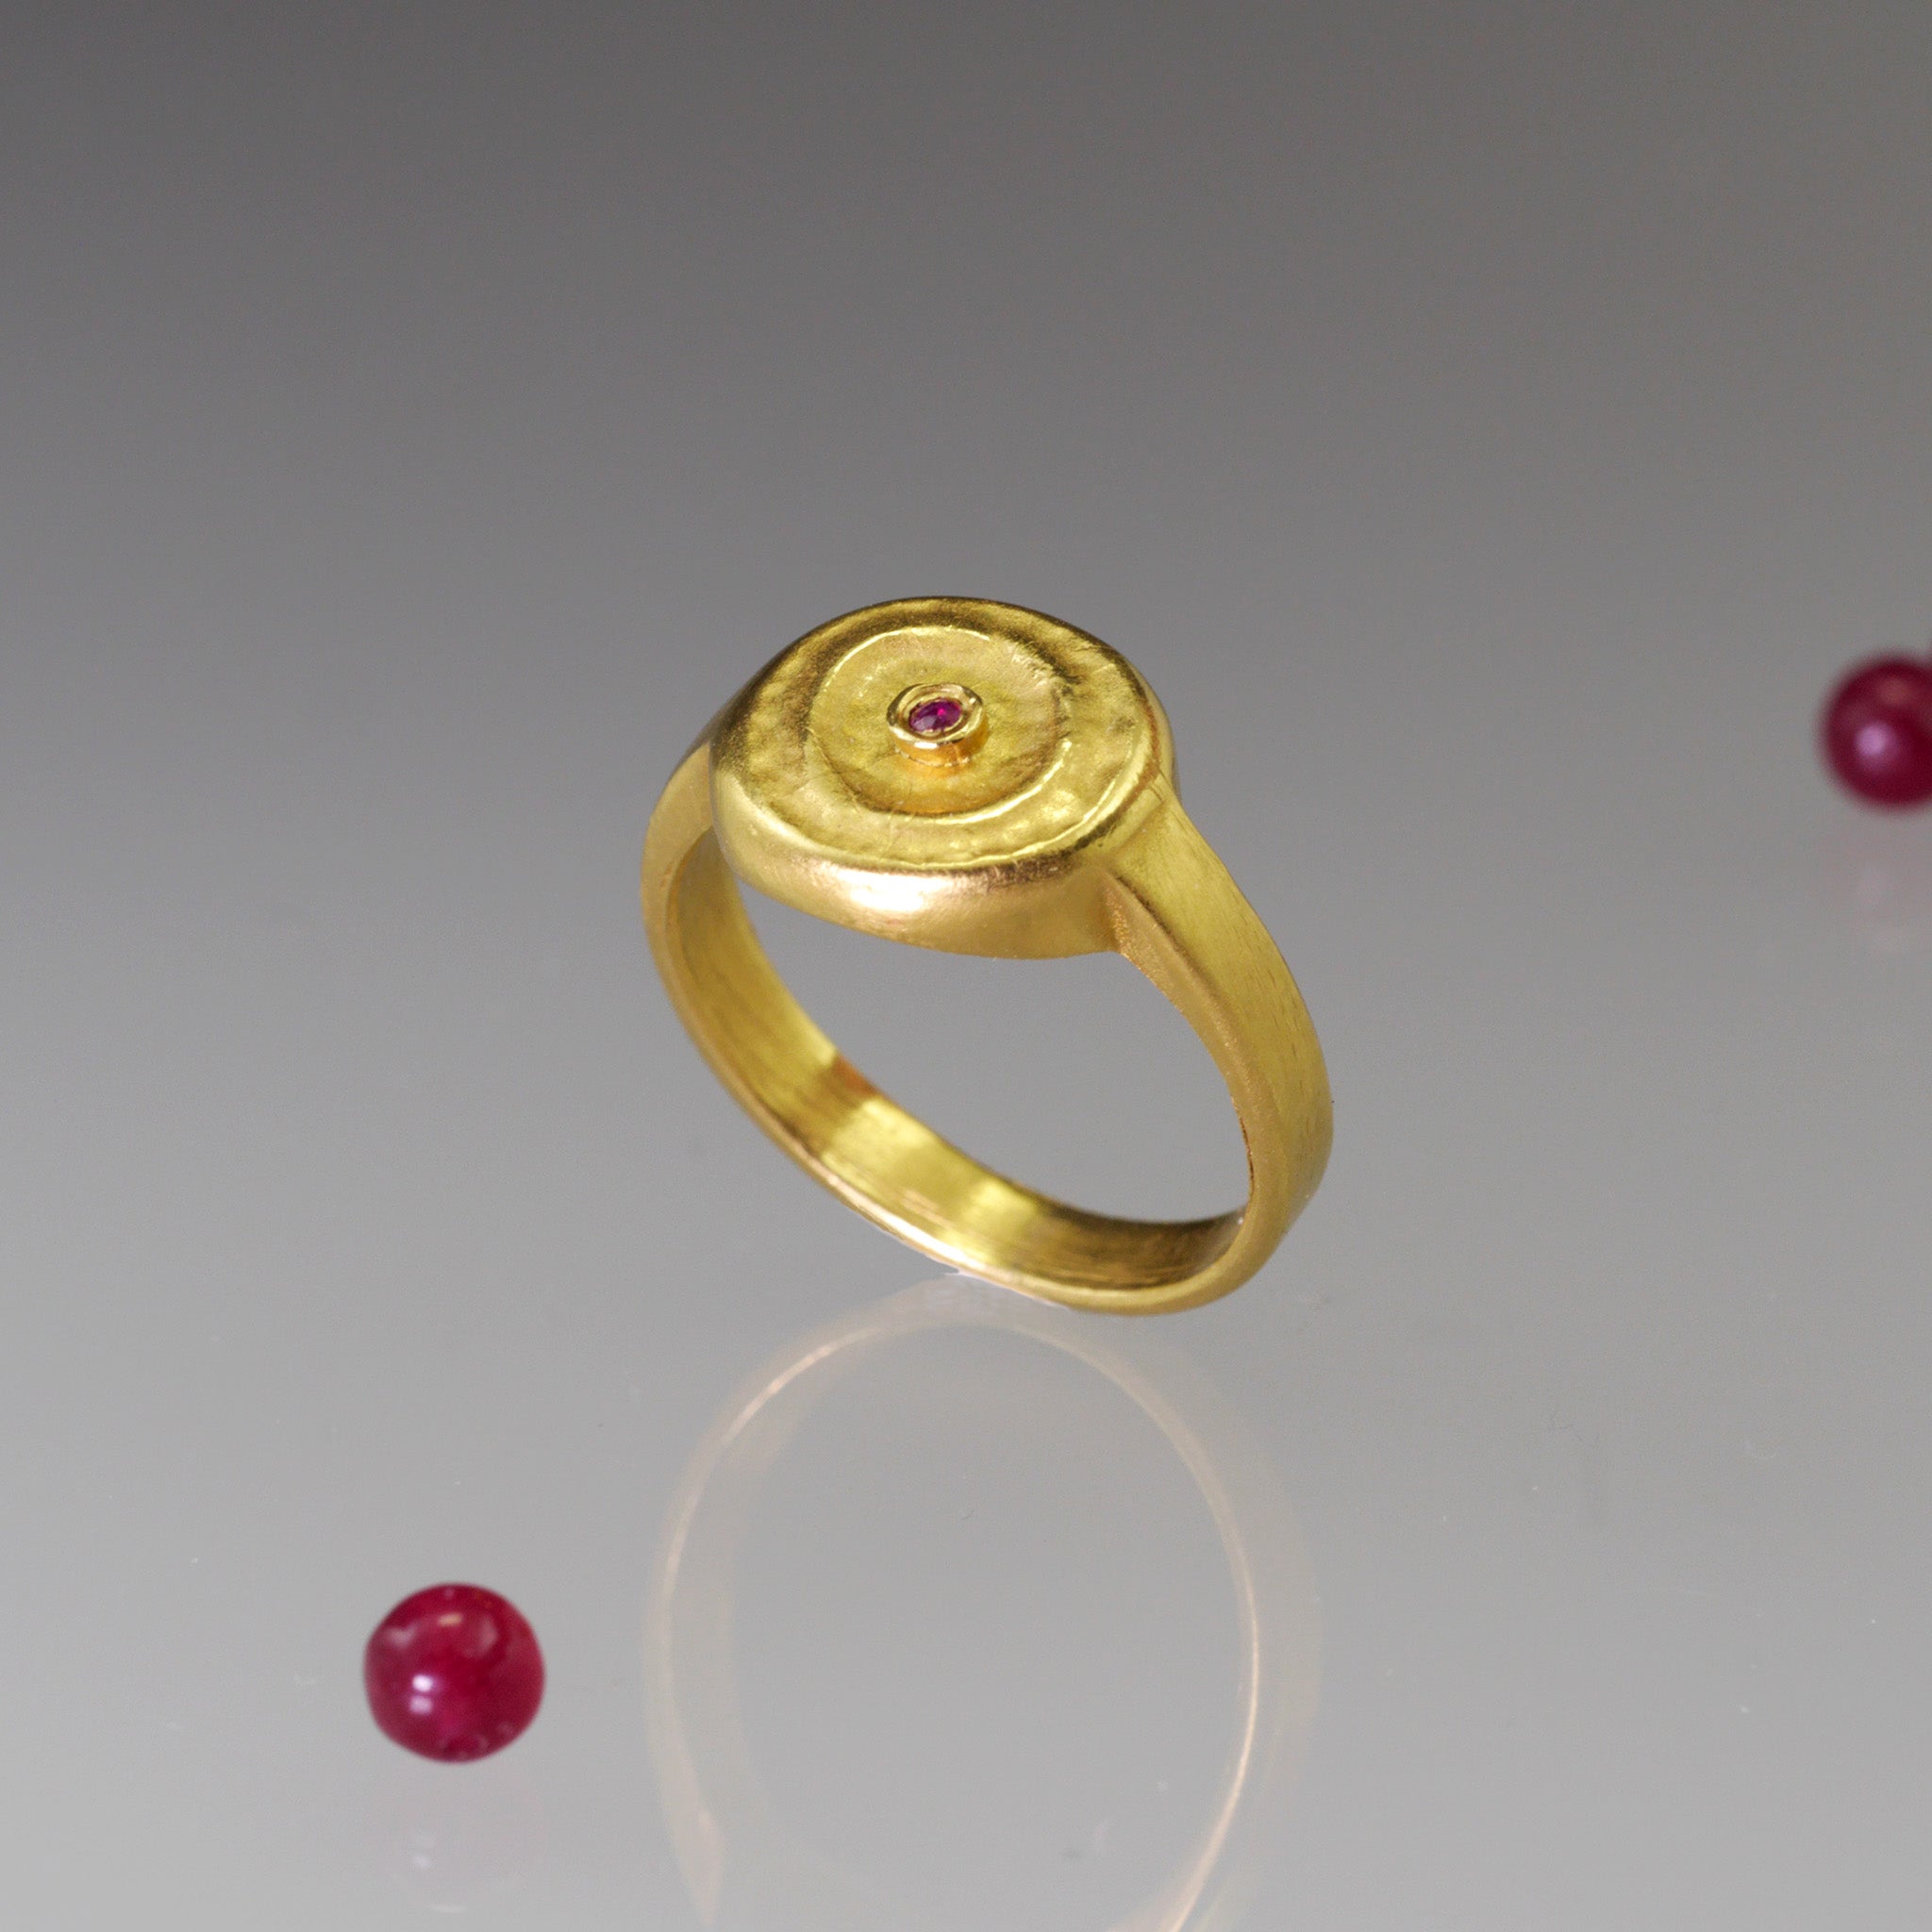 Handmade 18k Gold ring with a central Ruby, exuding vintage charm reminiscent of the Egyptian pharaohs' era.